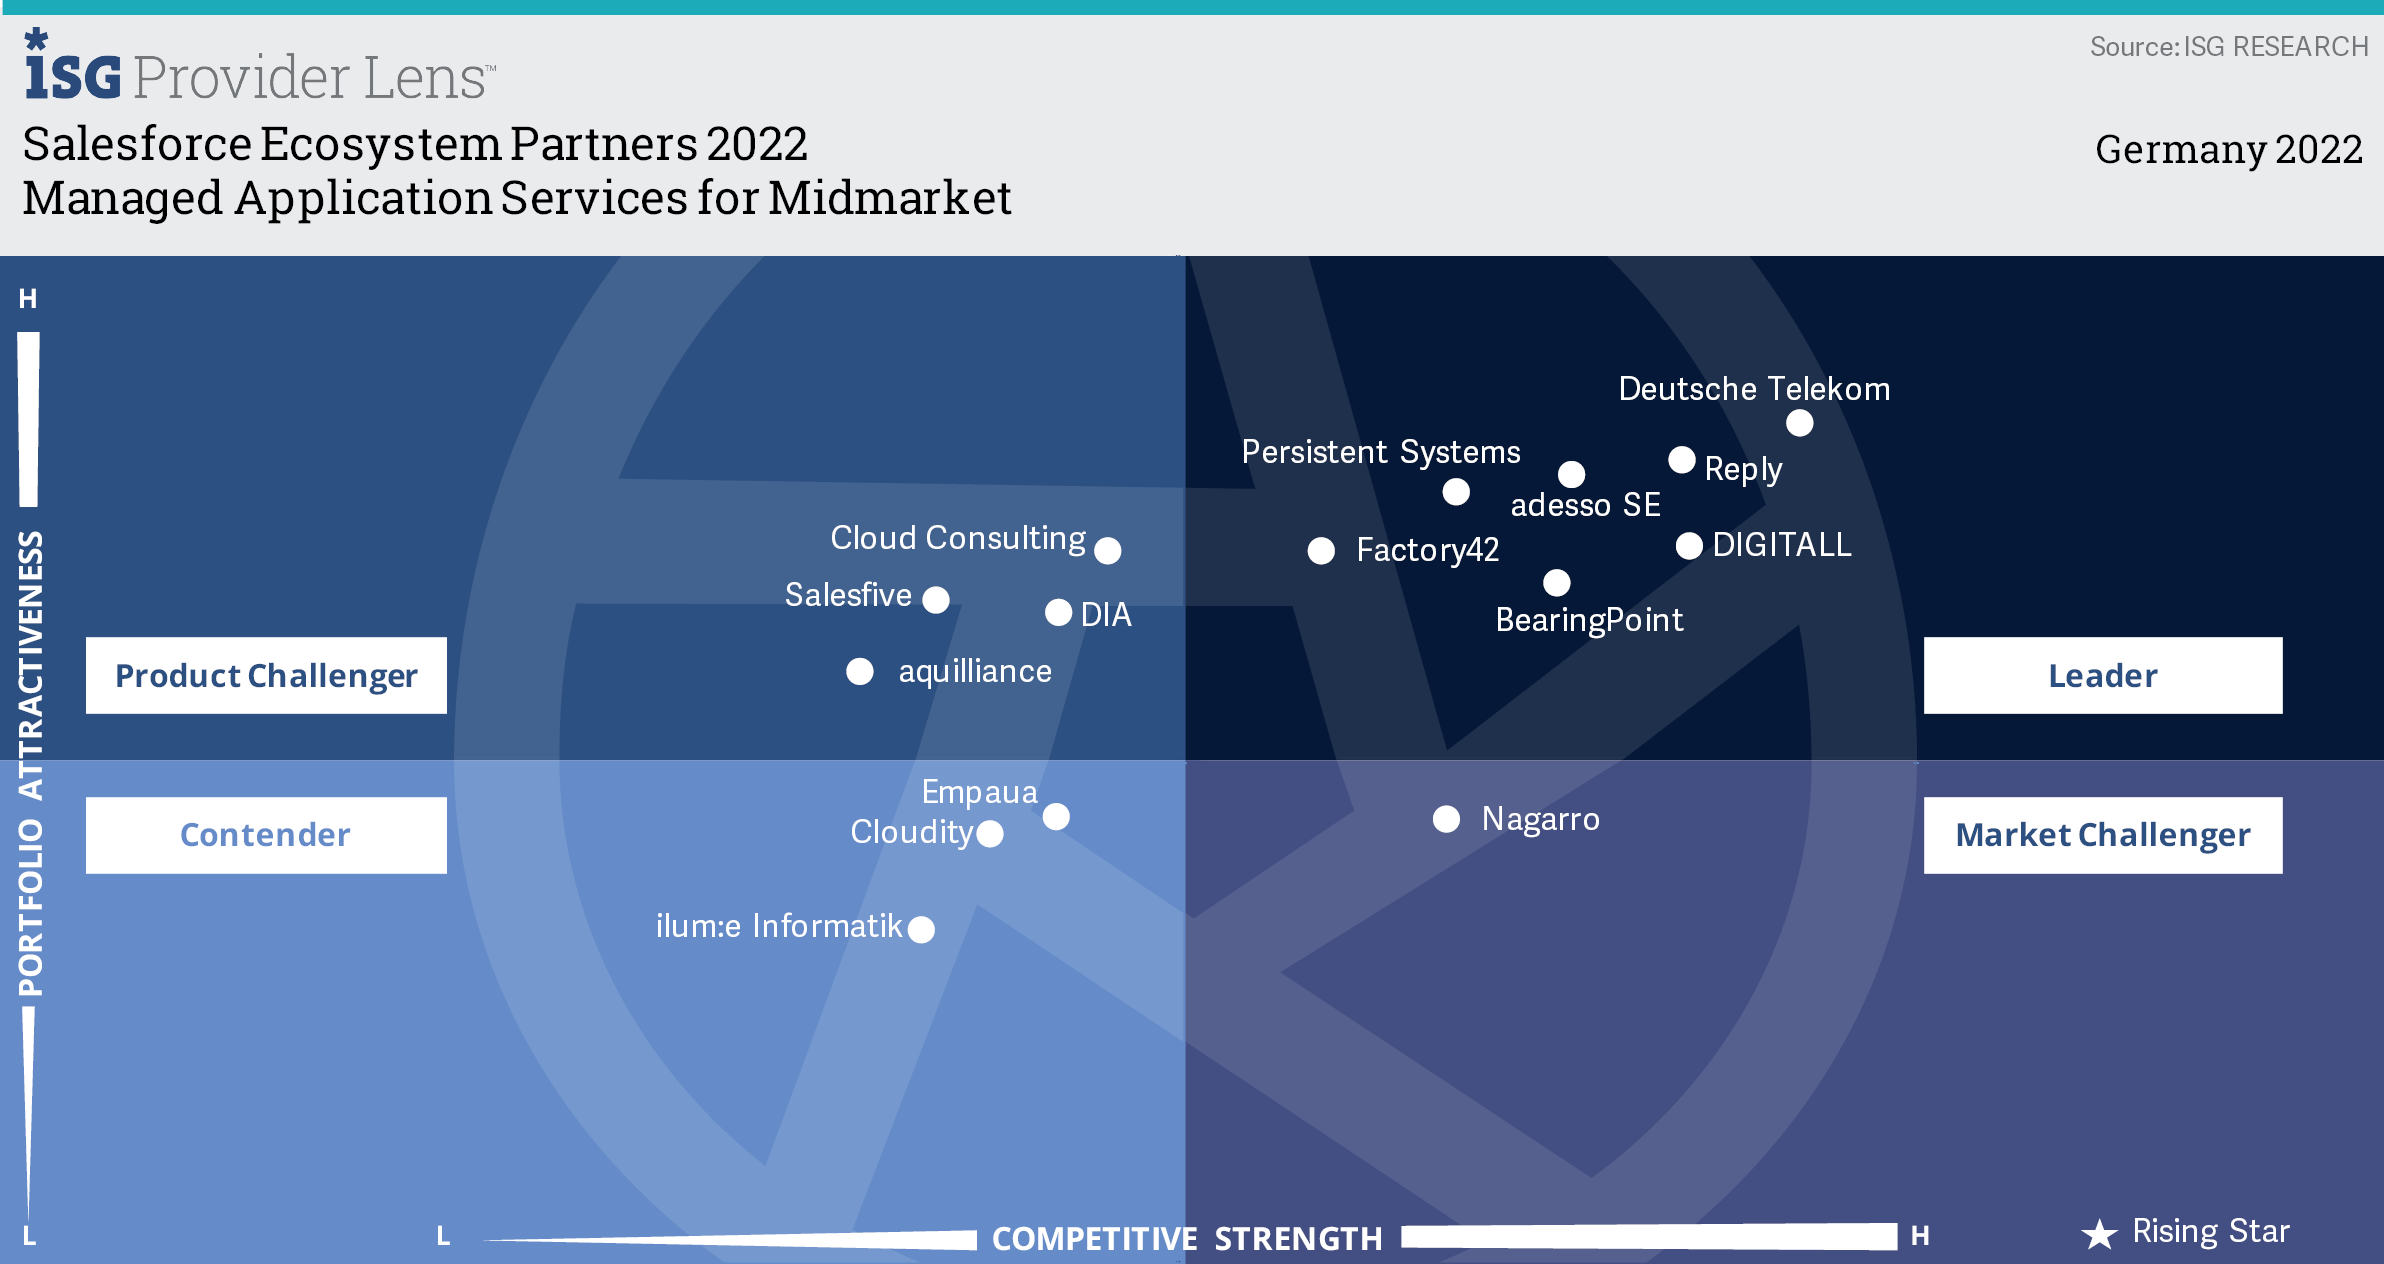 ISG Provider Lens Salesforce Ecosystem Partners 2022 Managed Application Services Midmarket. DIGITALL is identified as a leader in the quadrant. 